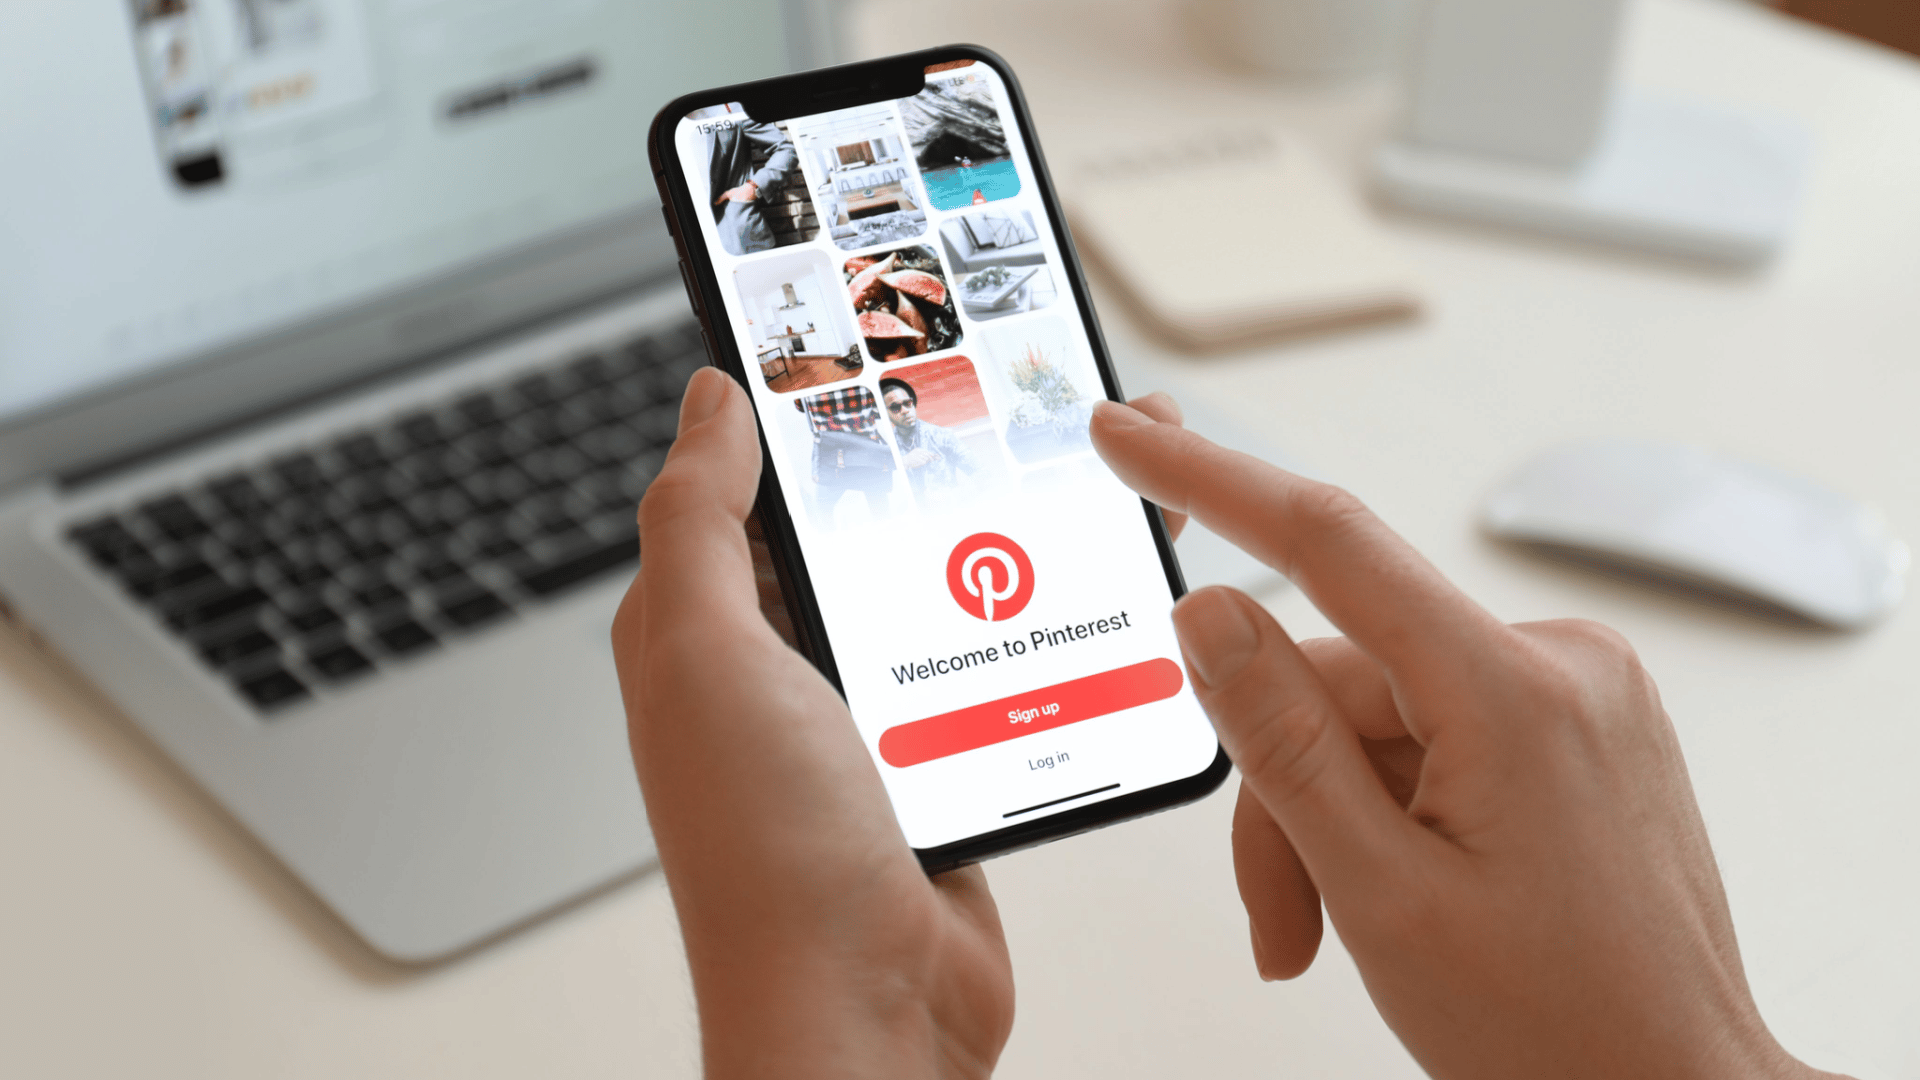 Pinterest introduced hosted checkout for merchants